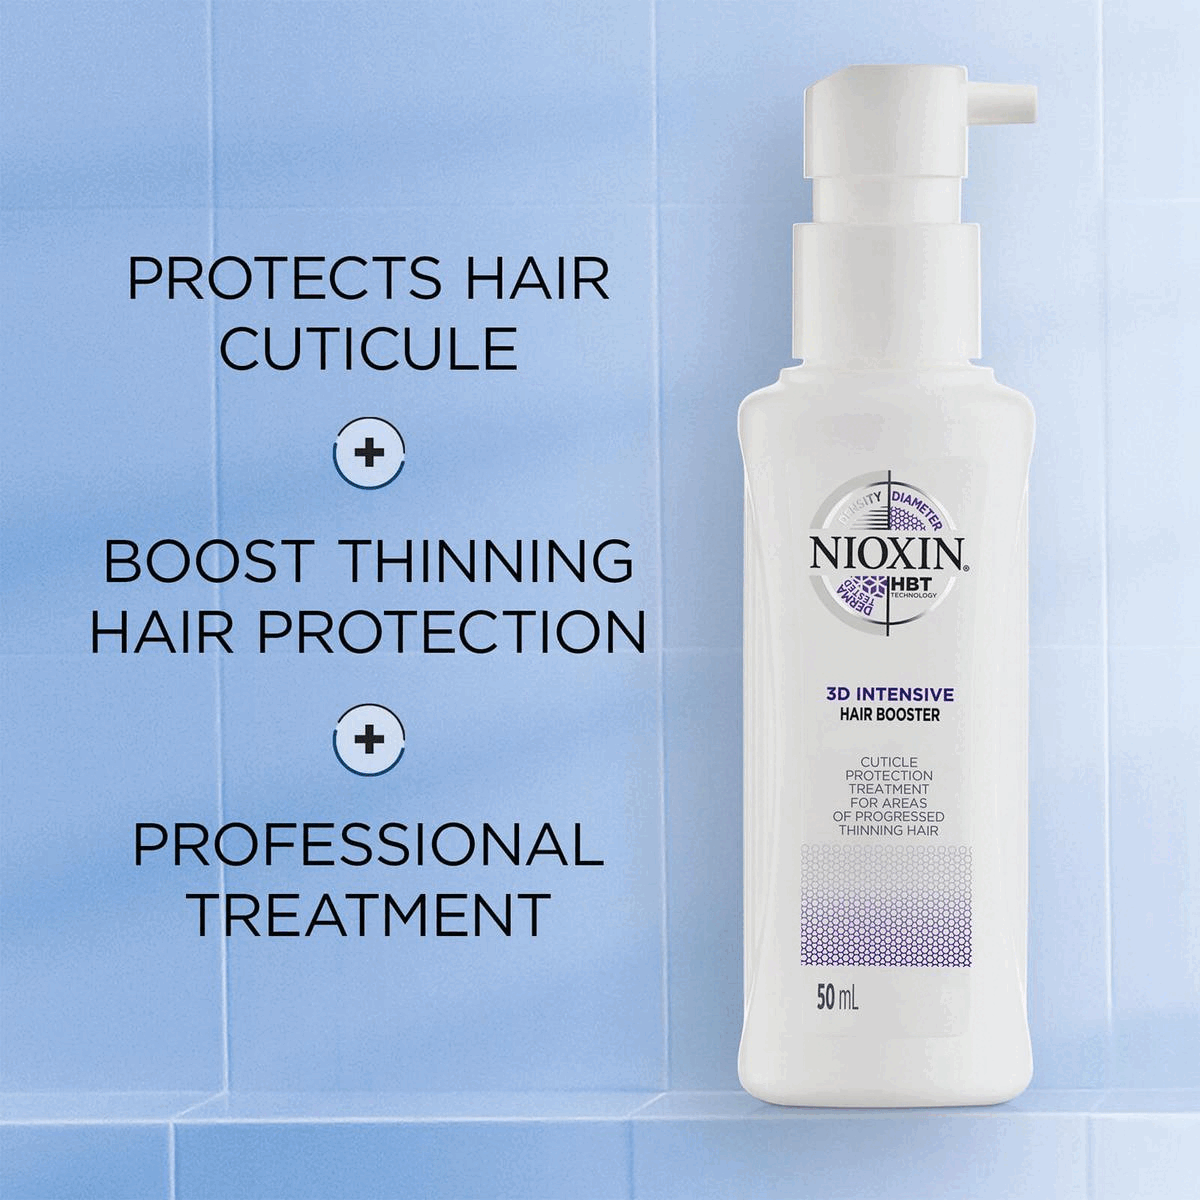 Protects hair cuticule + boost thinning hair protection + professional treatment. How to use Nioxin hair booster? Cuticule protection treatment 1. Use twice daily
            2. Distribute with fingers from root to tips 3. Massage the roots on areas of advanced thinning hair. NIOXIN - Density, Diameter, Derm. NIOXIN the no1. salon brand for thicker, fuller hair. Booster Treatment 50ml